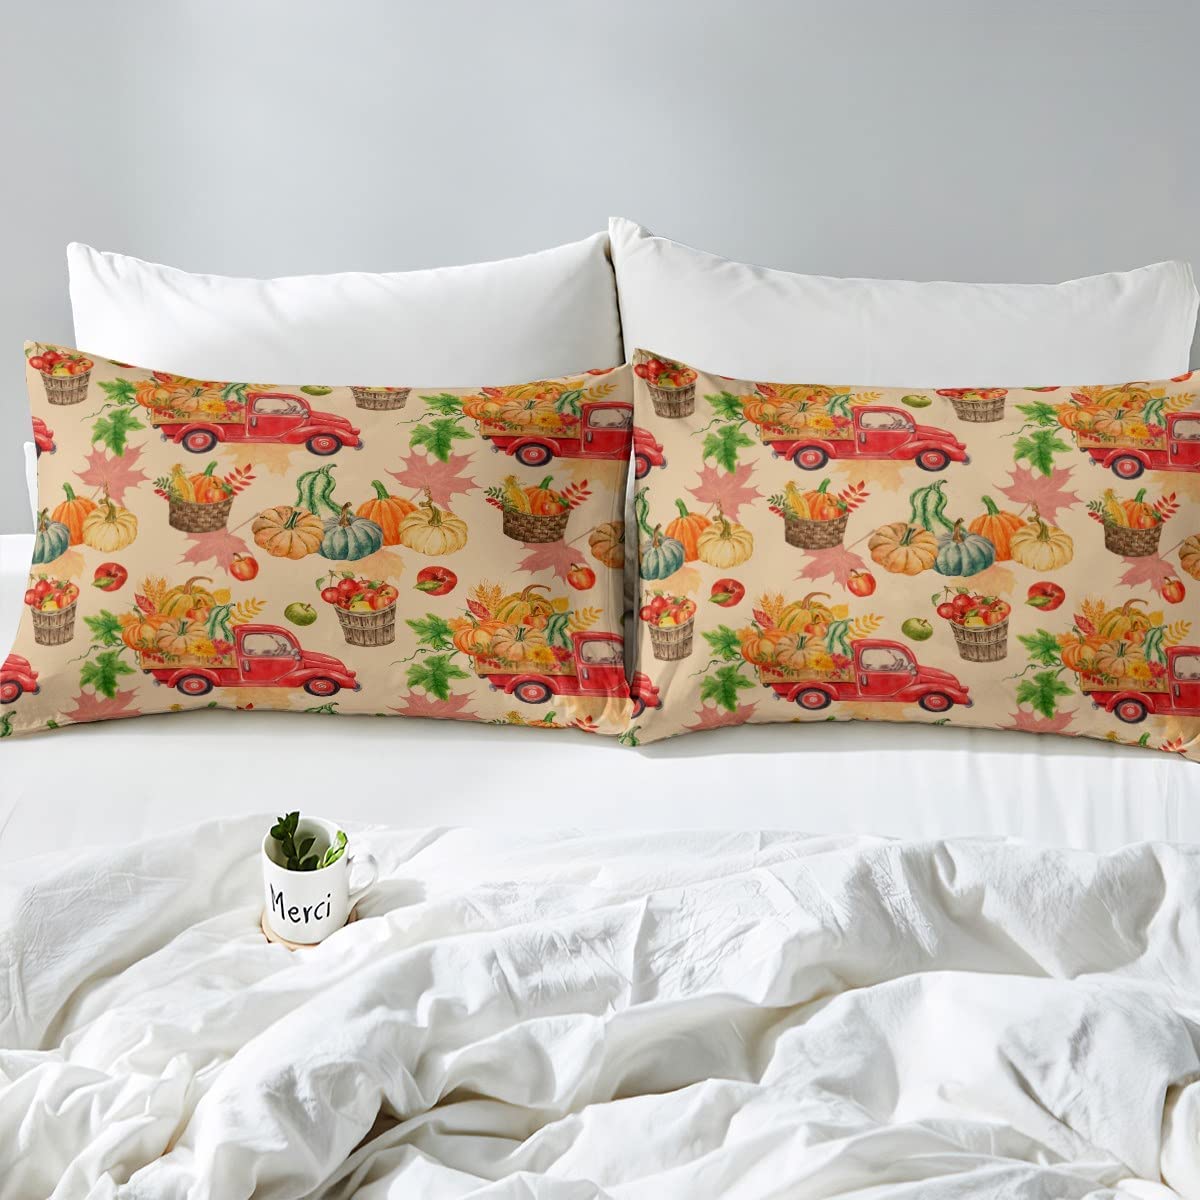 Autumn Harvest Theme Sheet Set Thanksgiving Pumpkin Bed Sheets for Kids Child,Fall Decor Fall Leaves Fruit King Queen Full Size